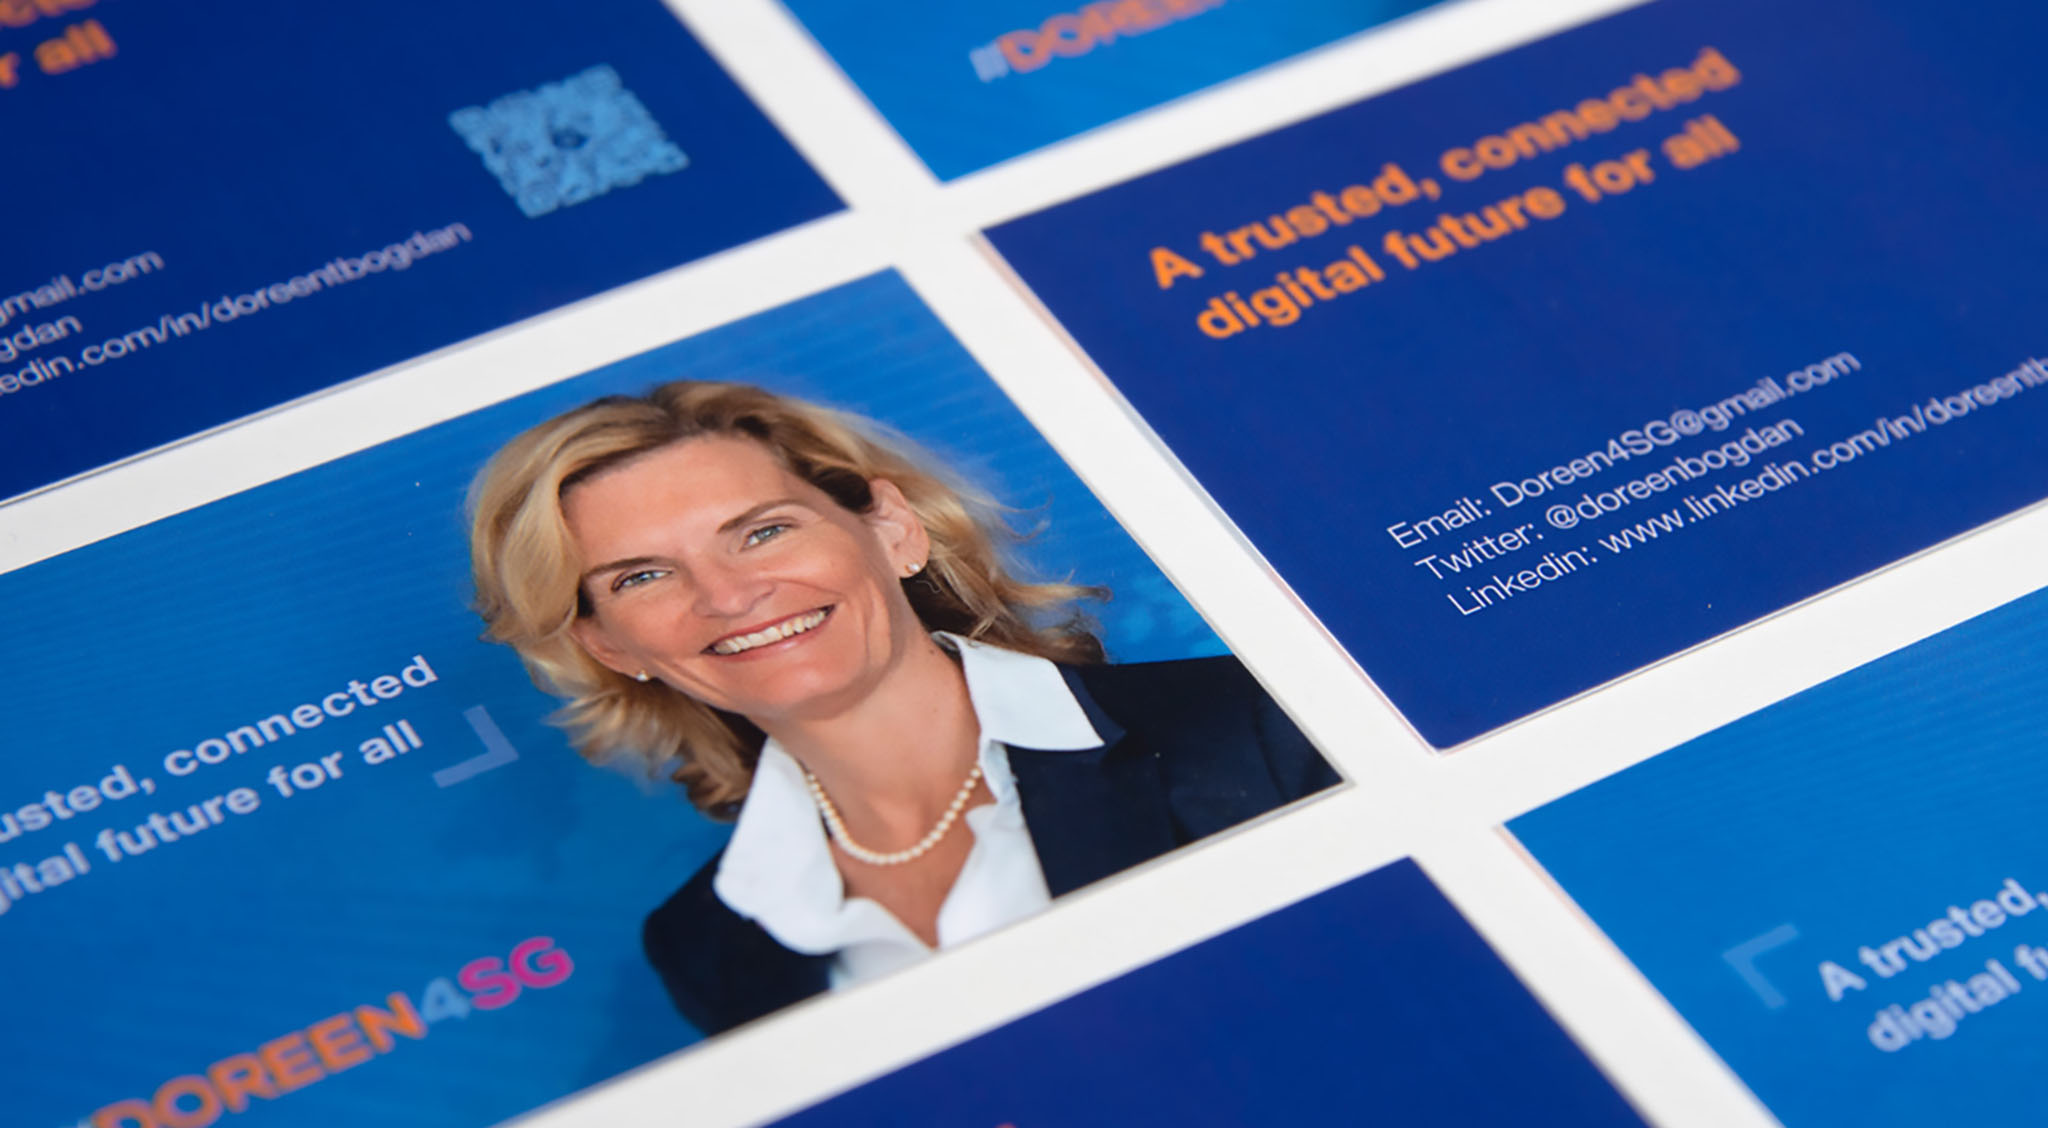 Image showing a business woman on social media cards as digital and print marketing samples created by SmartCuts Creative in Lausanne and Geneva, Switzerland.